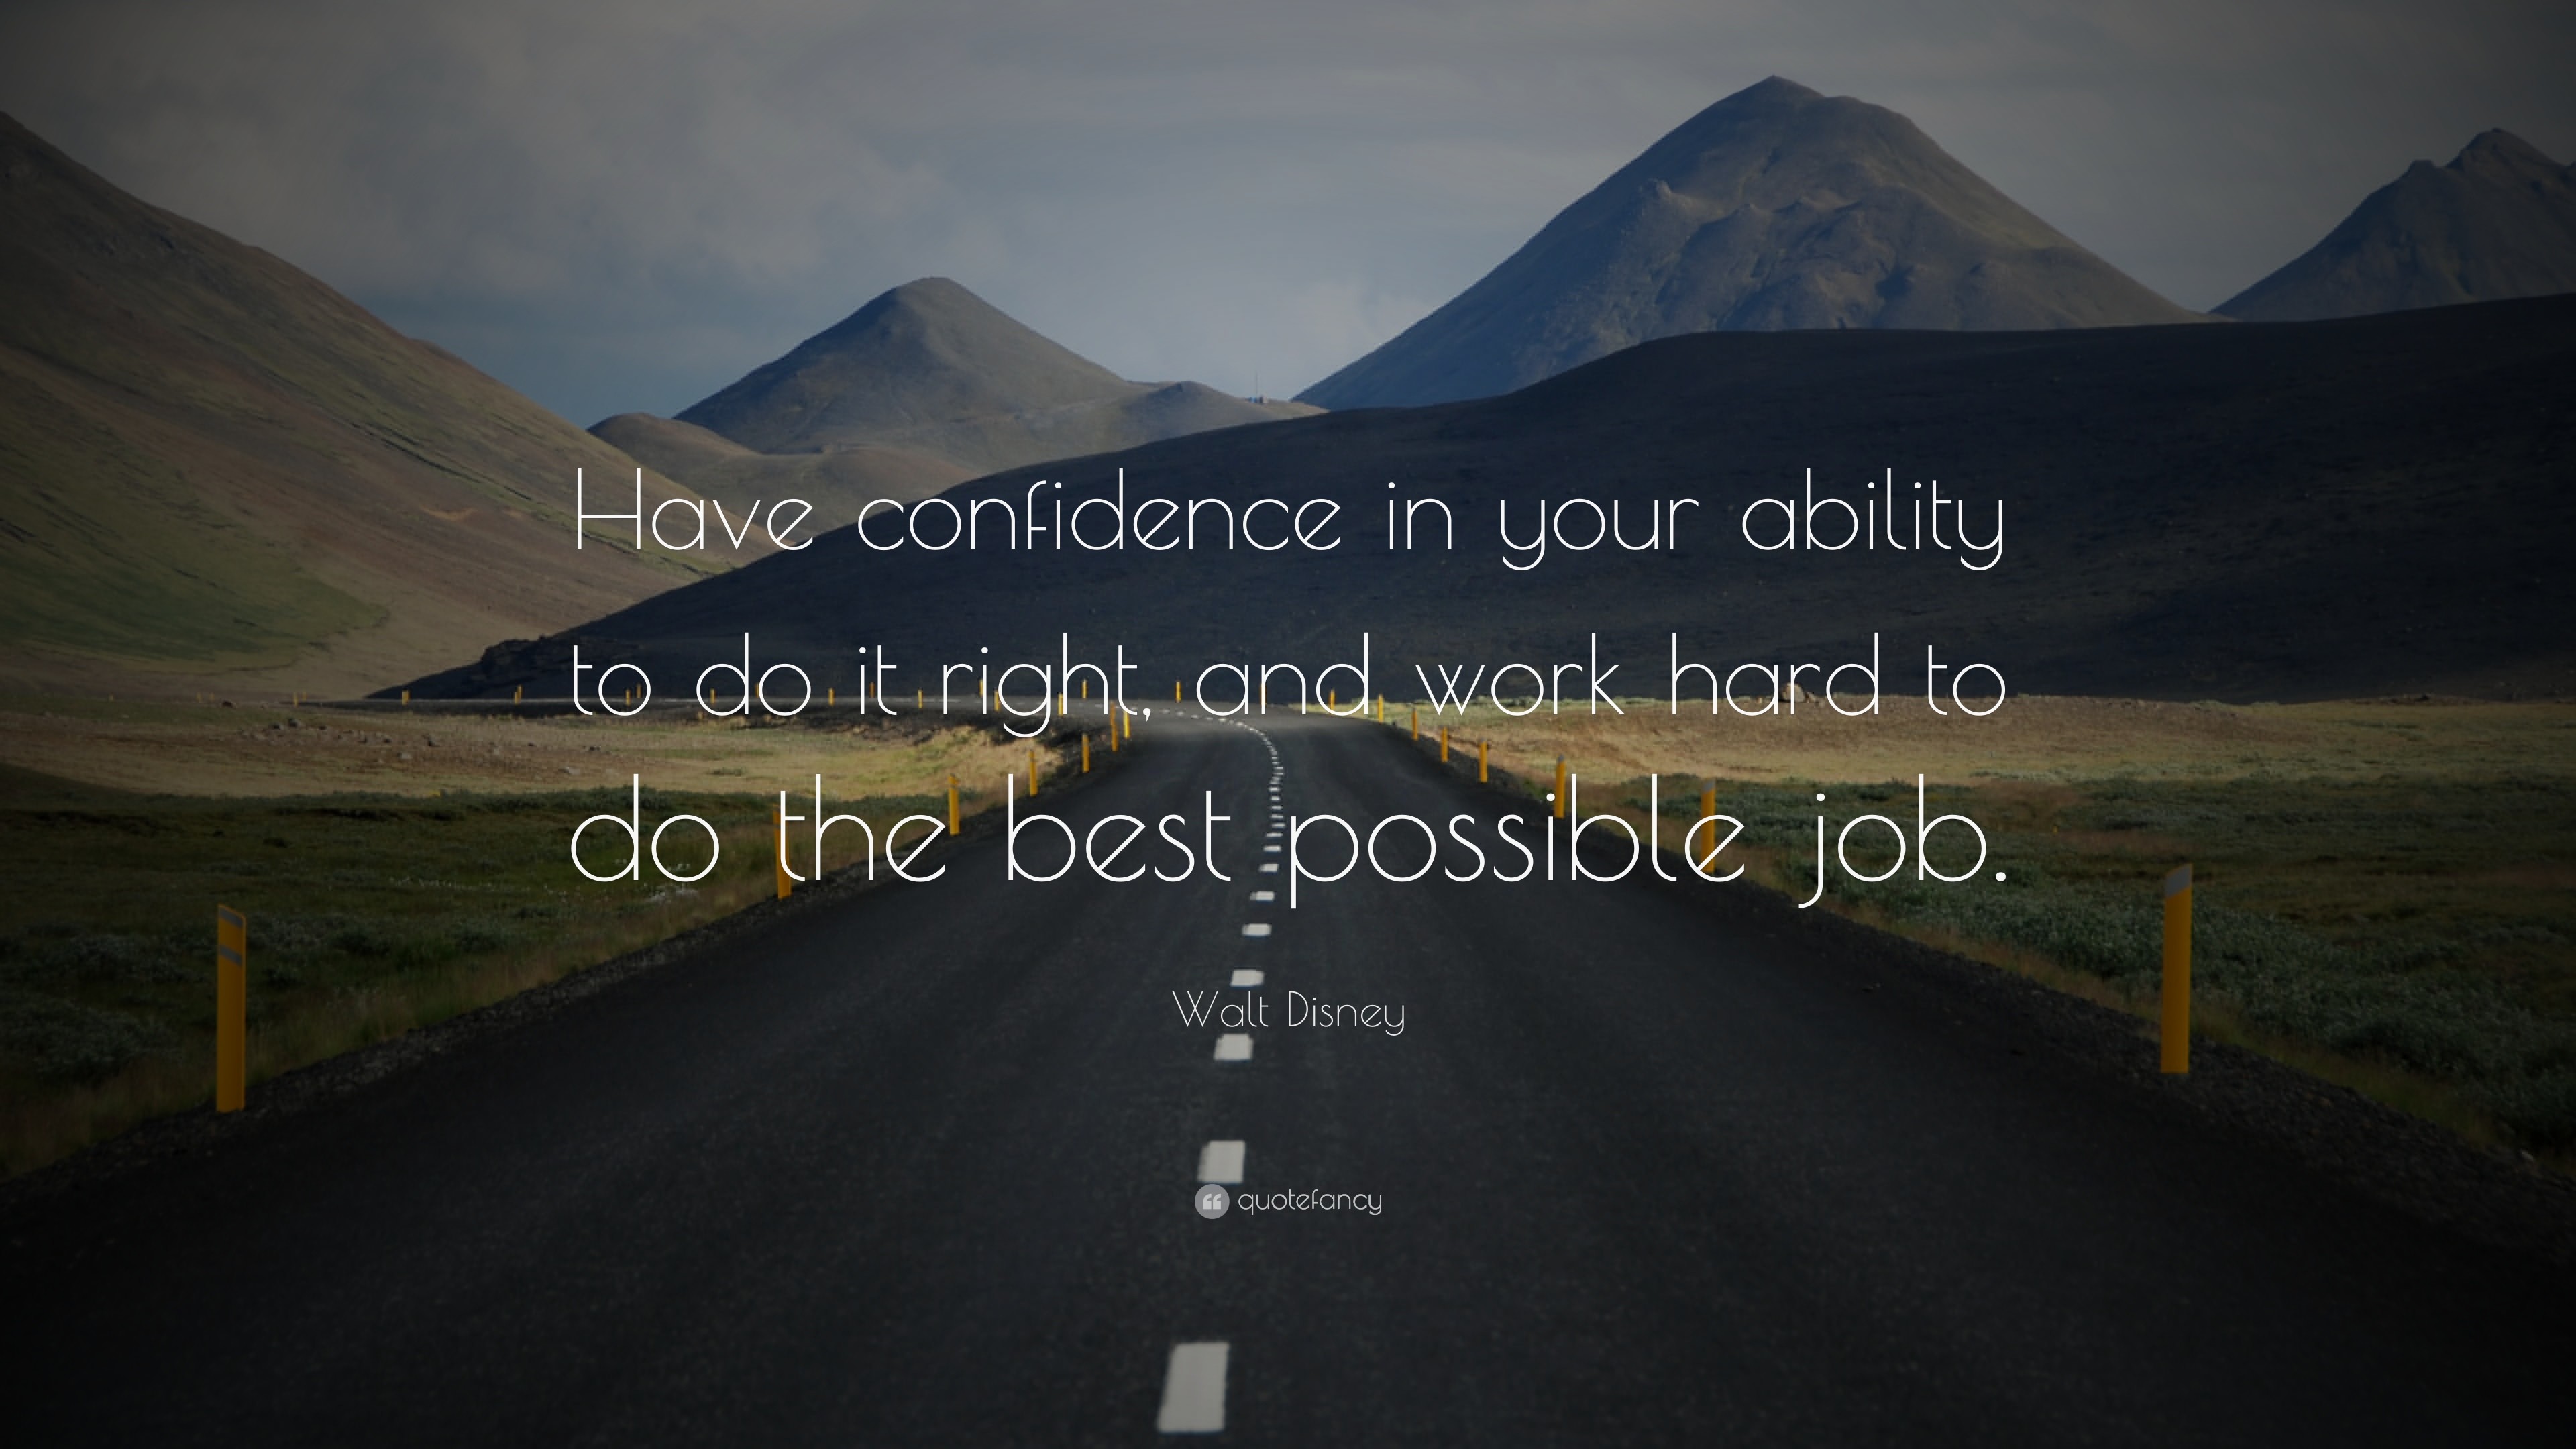 3840x2160 Walt Disney Quote: “Have confidence in your ability to do it right, and